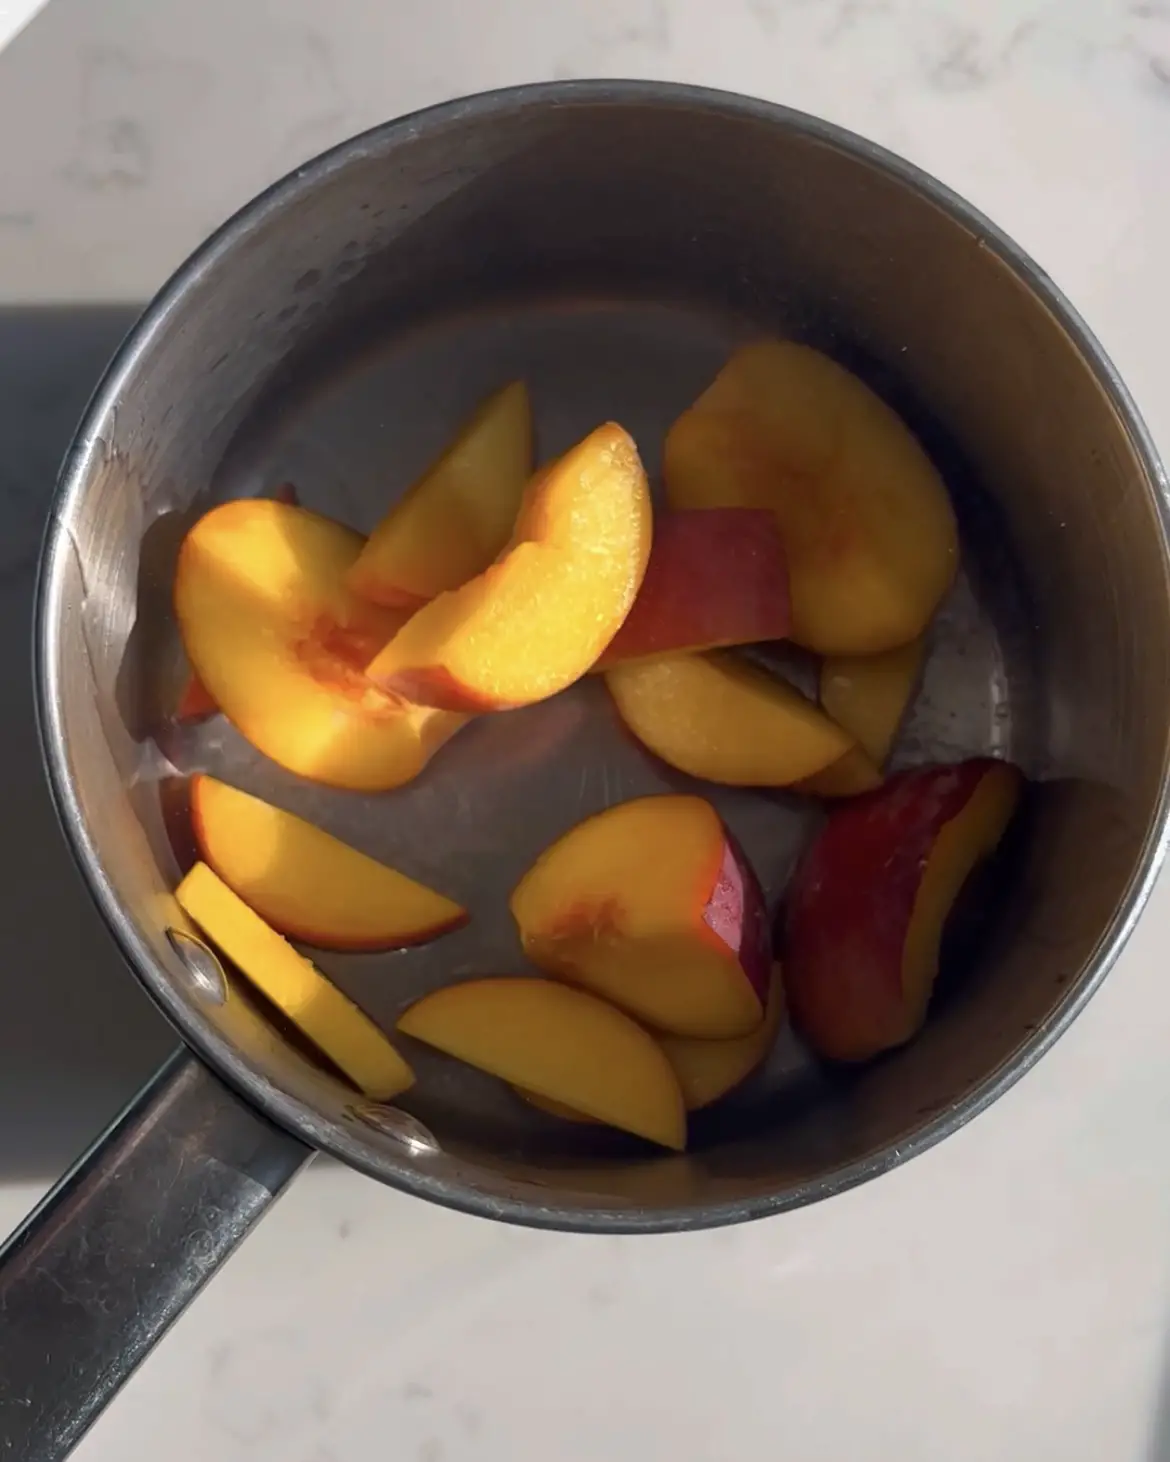 Fry the peaches